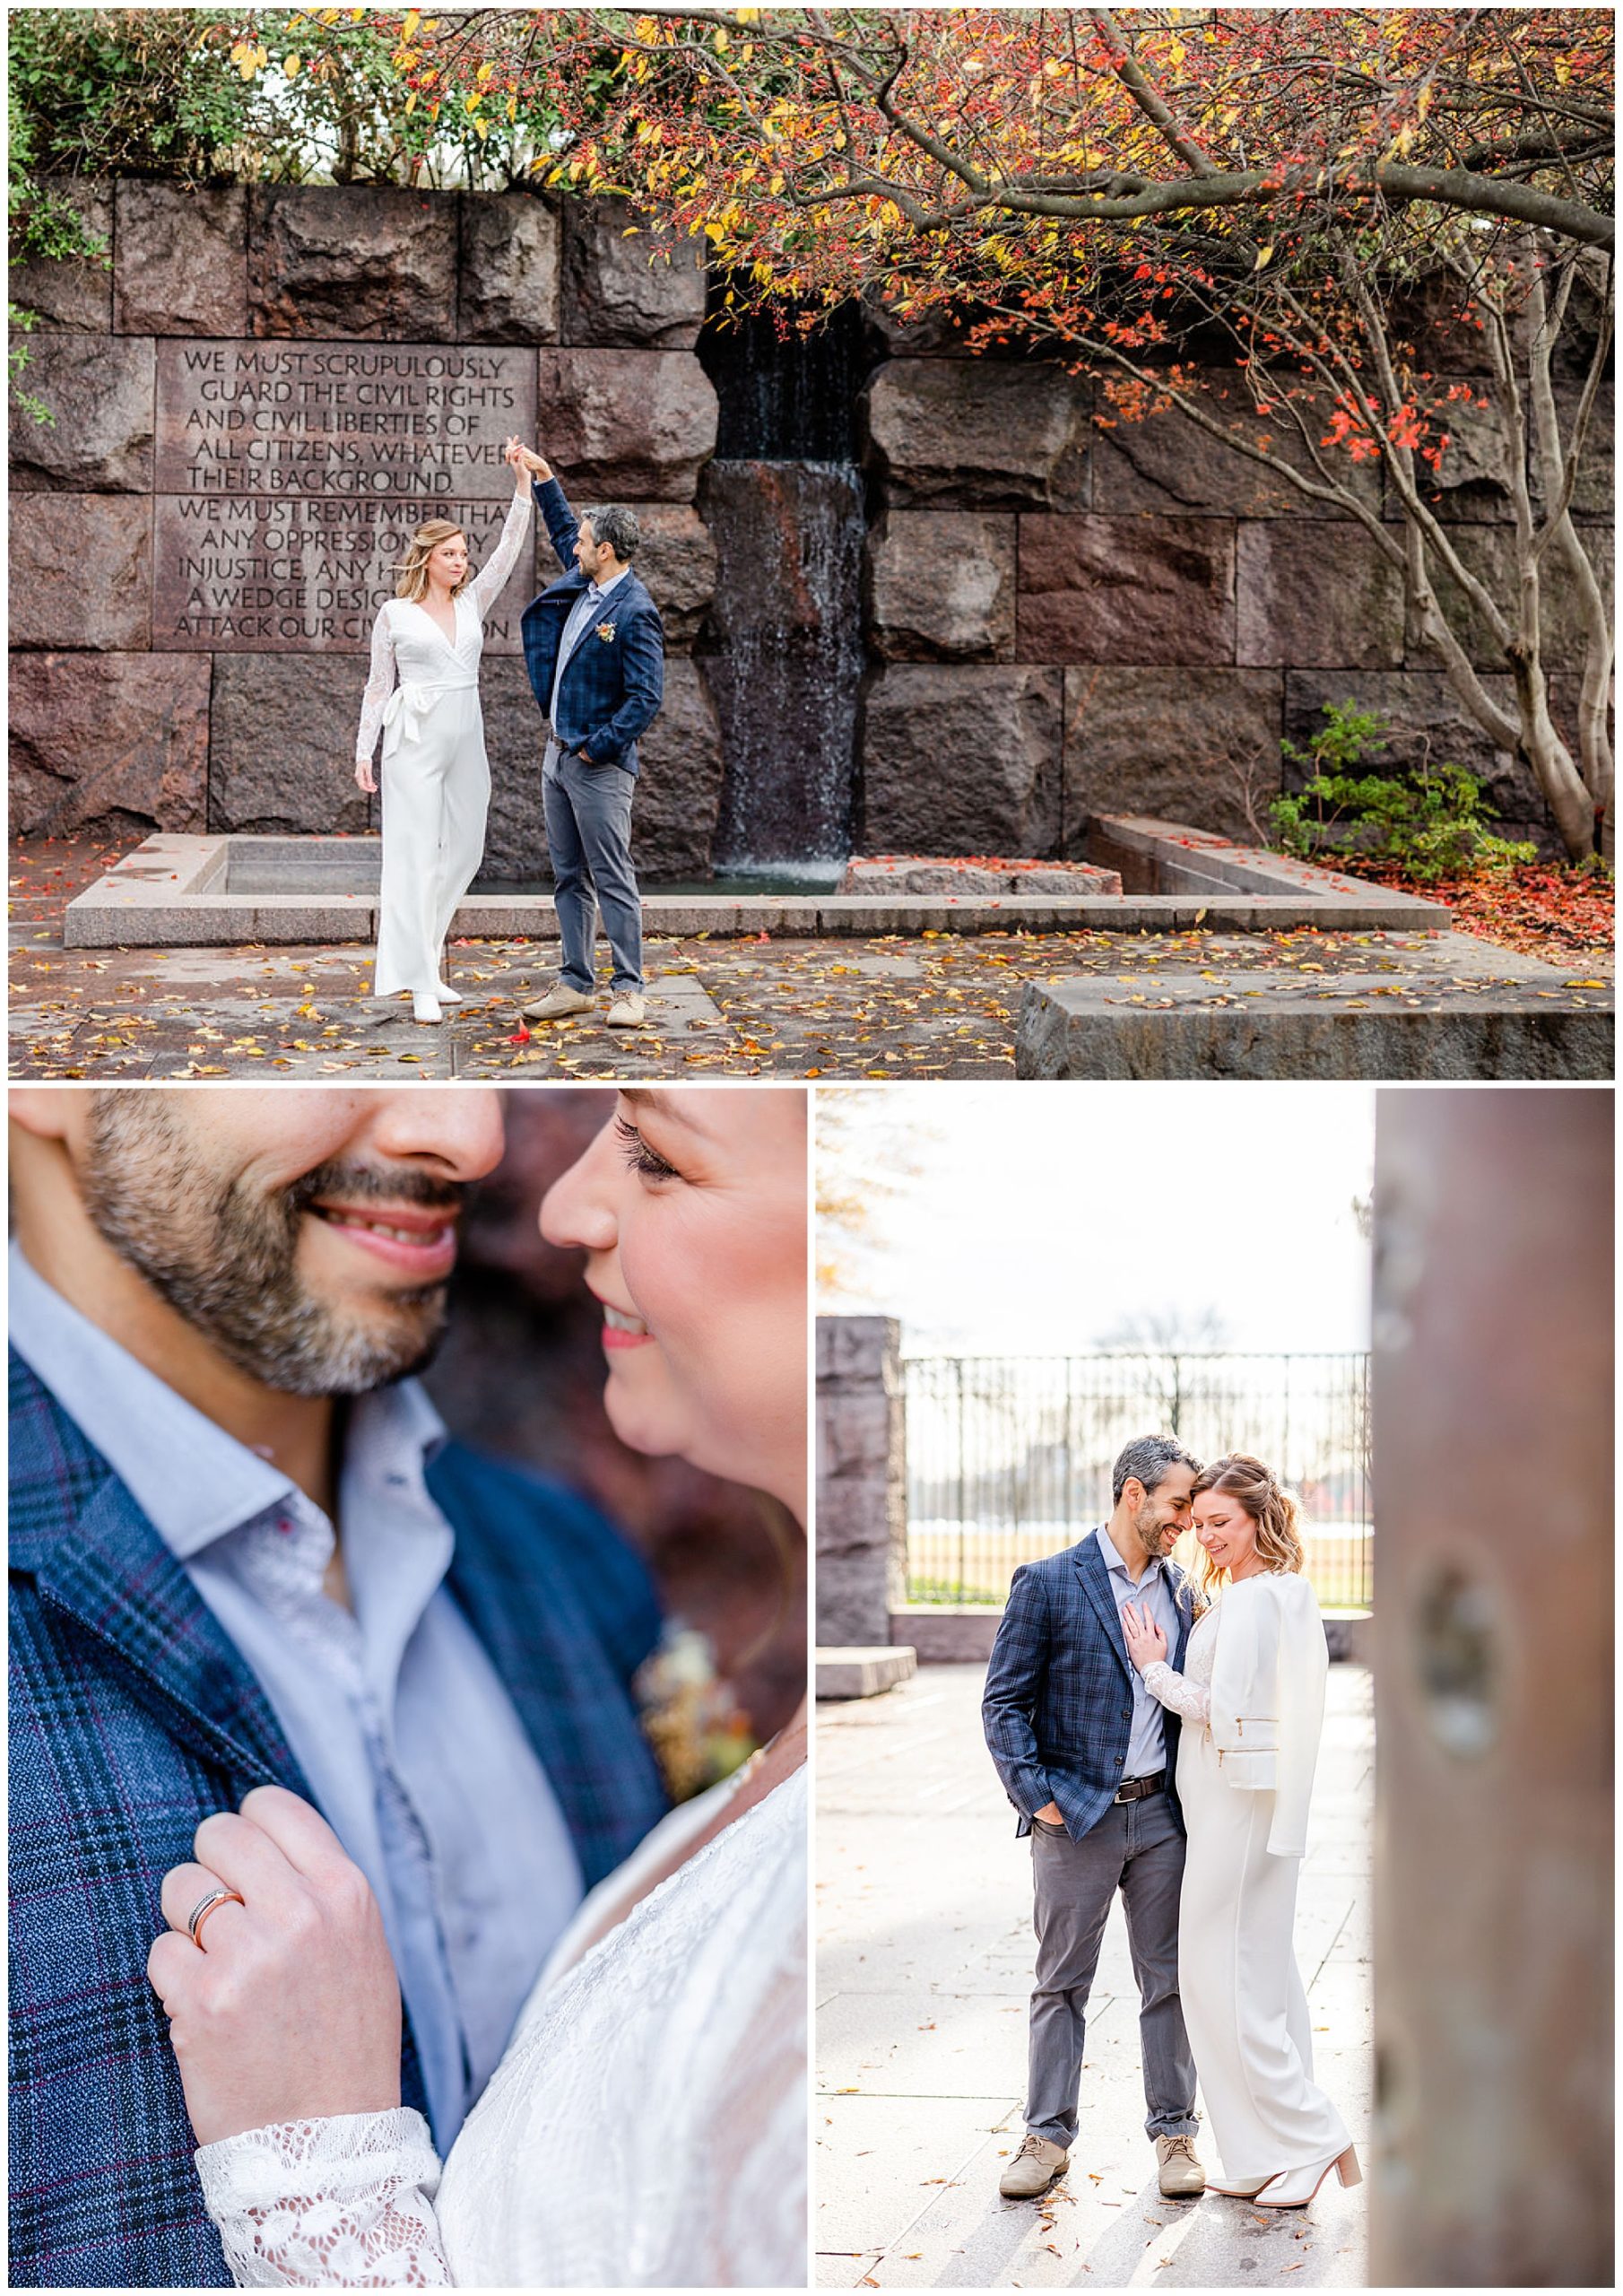 FDR Memorial elopement, DC War Memorial elopement, DC War Memorial photos, DC War Memorial wedding, DC portraits, tidal basin portraits, DC wedding photography, DC elopement photographer, cold weather elopement, Rachel E.H. Photography, man twirling woman, couple dancing in front of waterfall, womans hand holding mans collar, man resting head on wife, hair and makeup by Carla Pressley Hair and Makeup